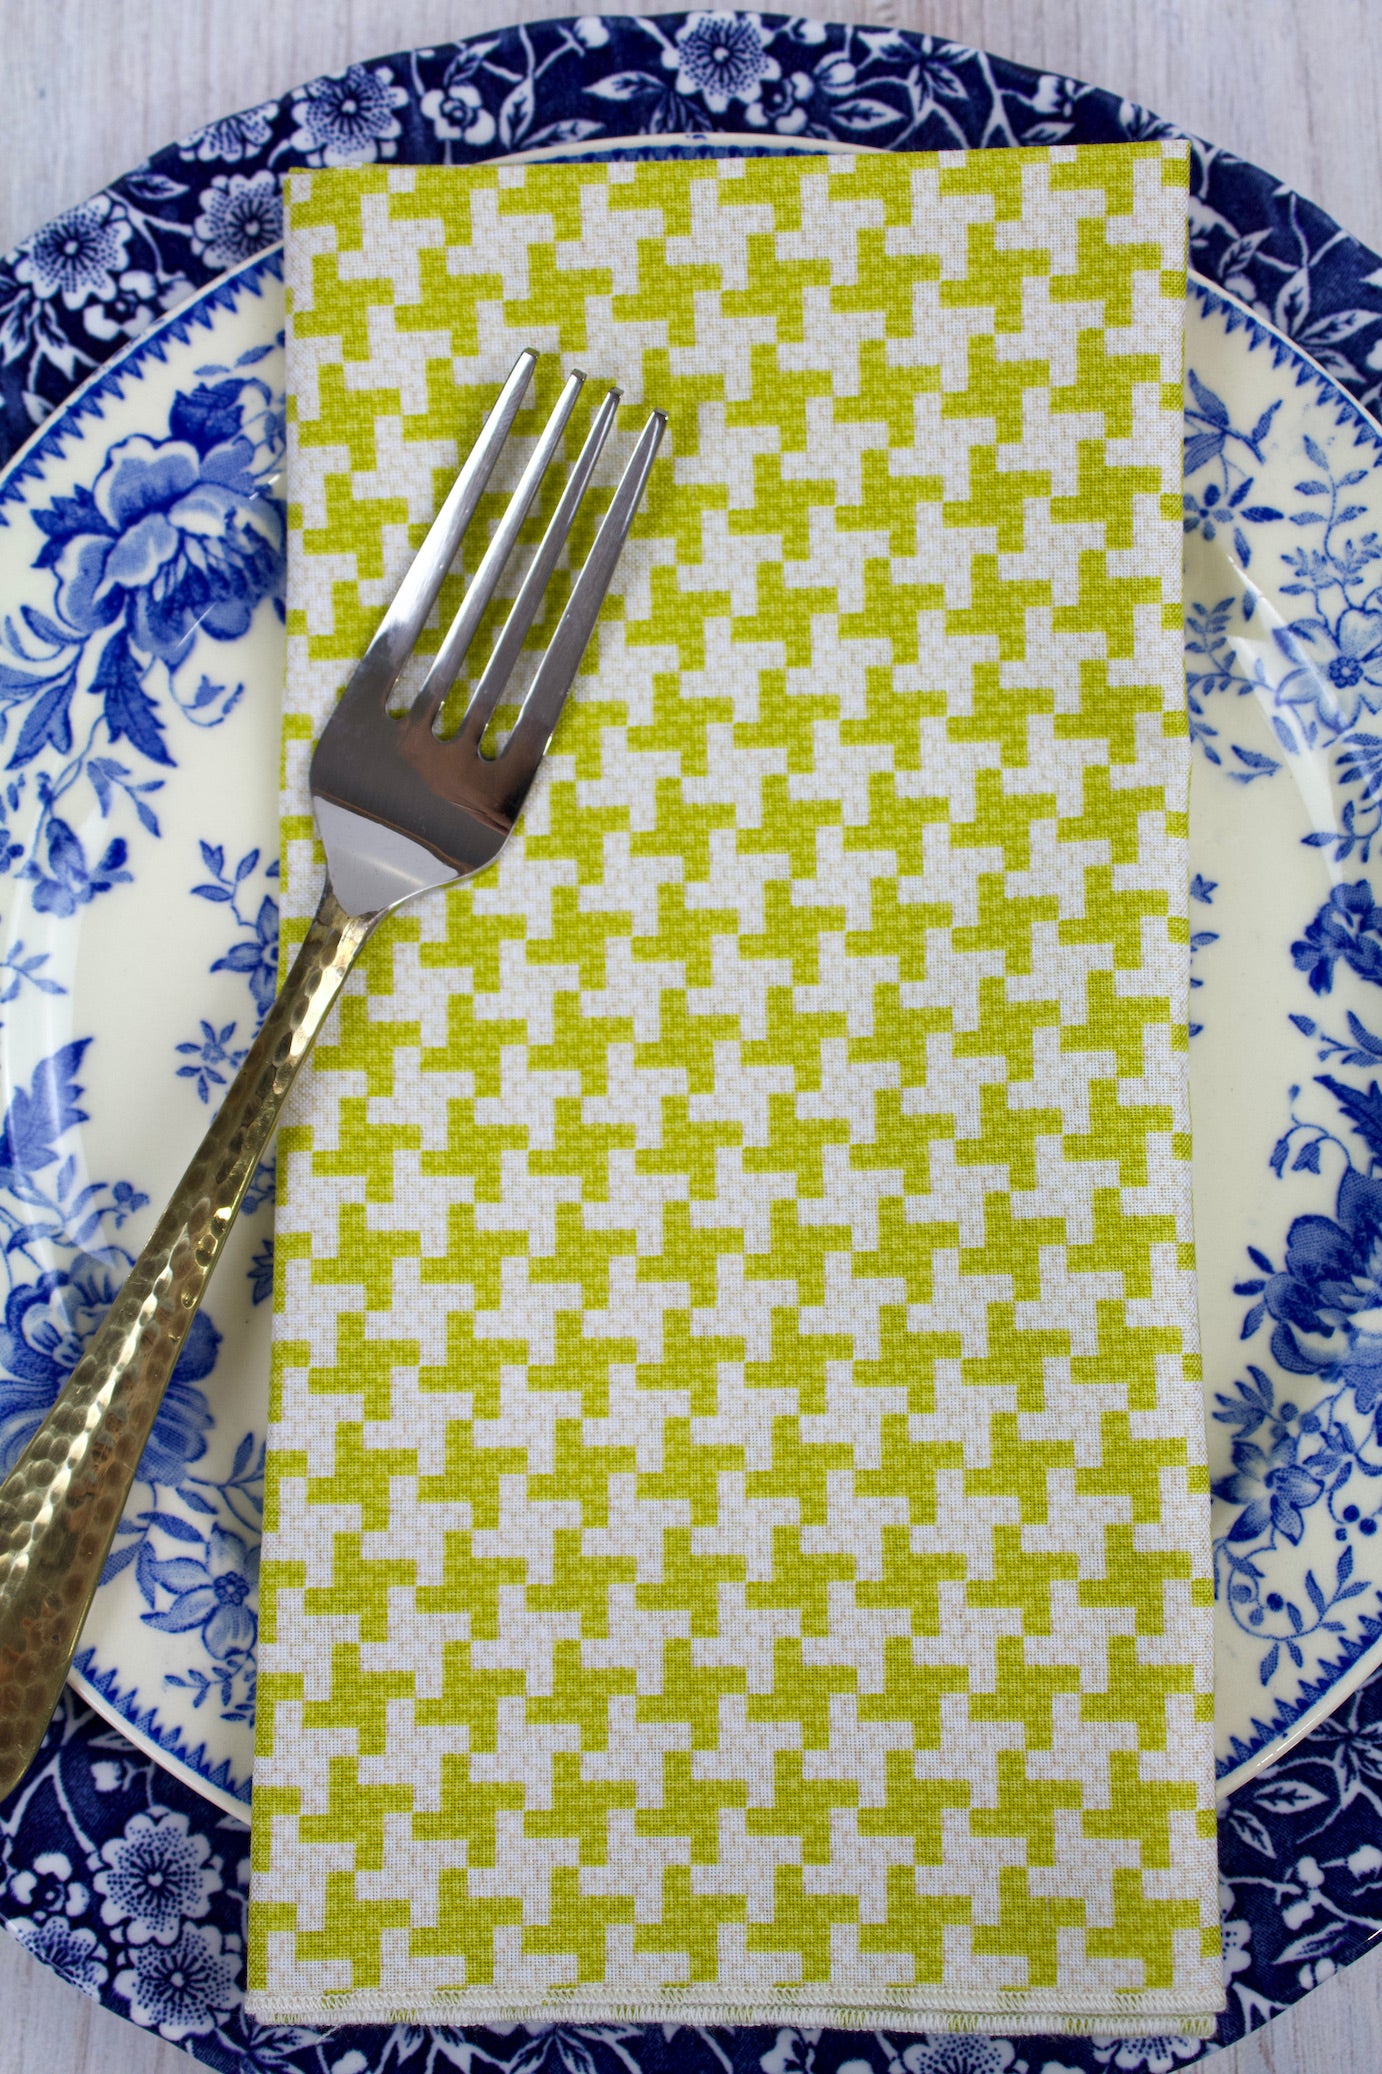 Vintage Rock Houndstooth Napkins in Lime (various sizes)-The Blue Peony-Category_Napkins,Category_Table Linens,Color_Green,Color_Lime Green,Department_Kitchen,Material_Cotton,Pattern_Graphic,Theme_Thanksgiving